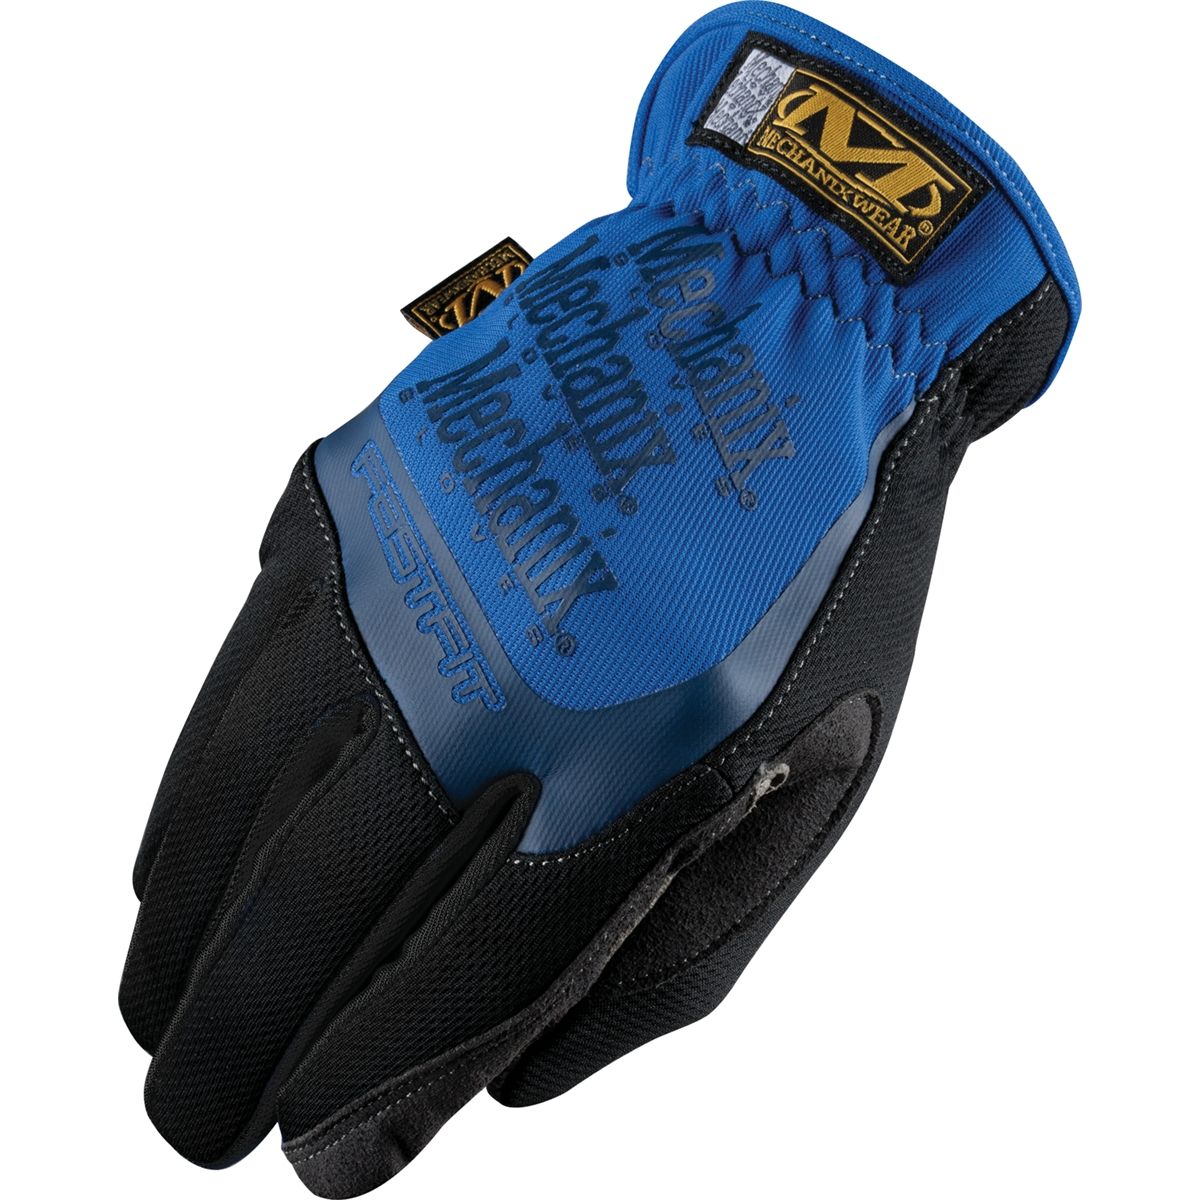 FastFit Gloves - Blue - Small